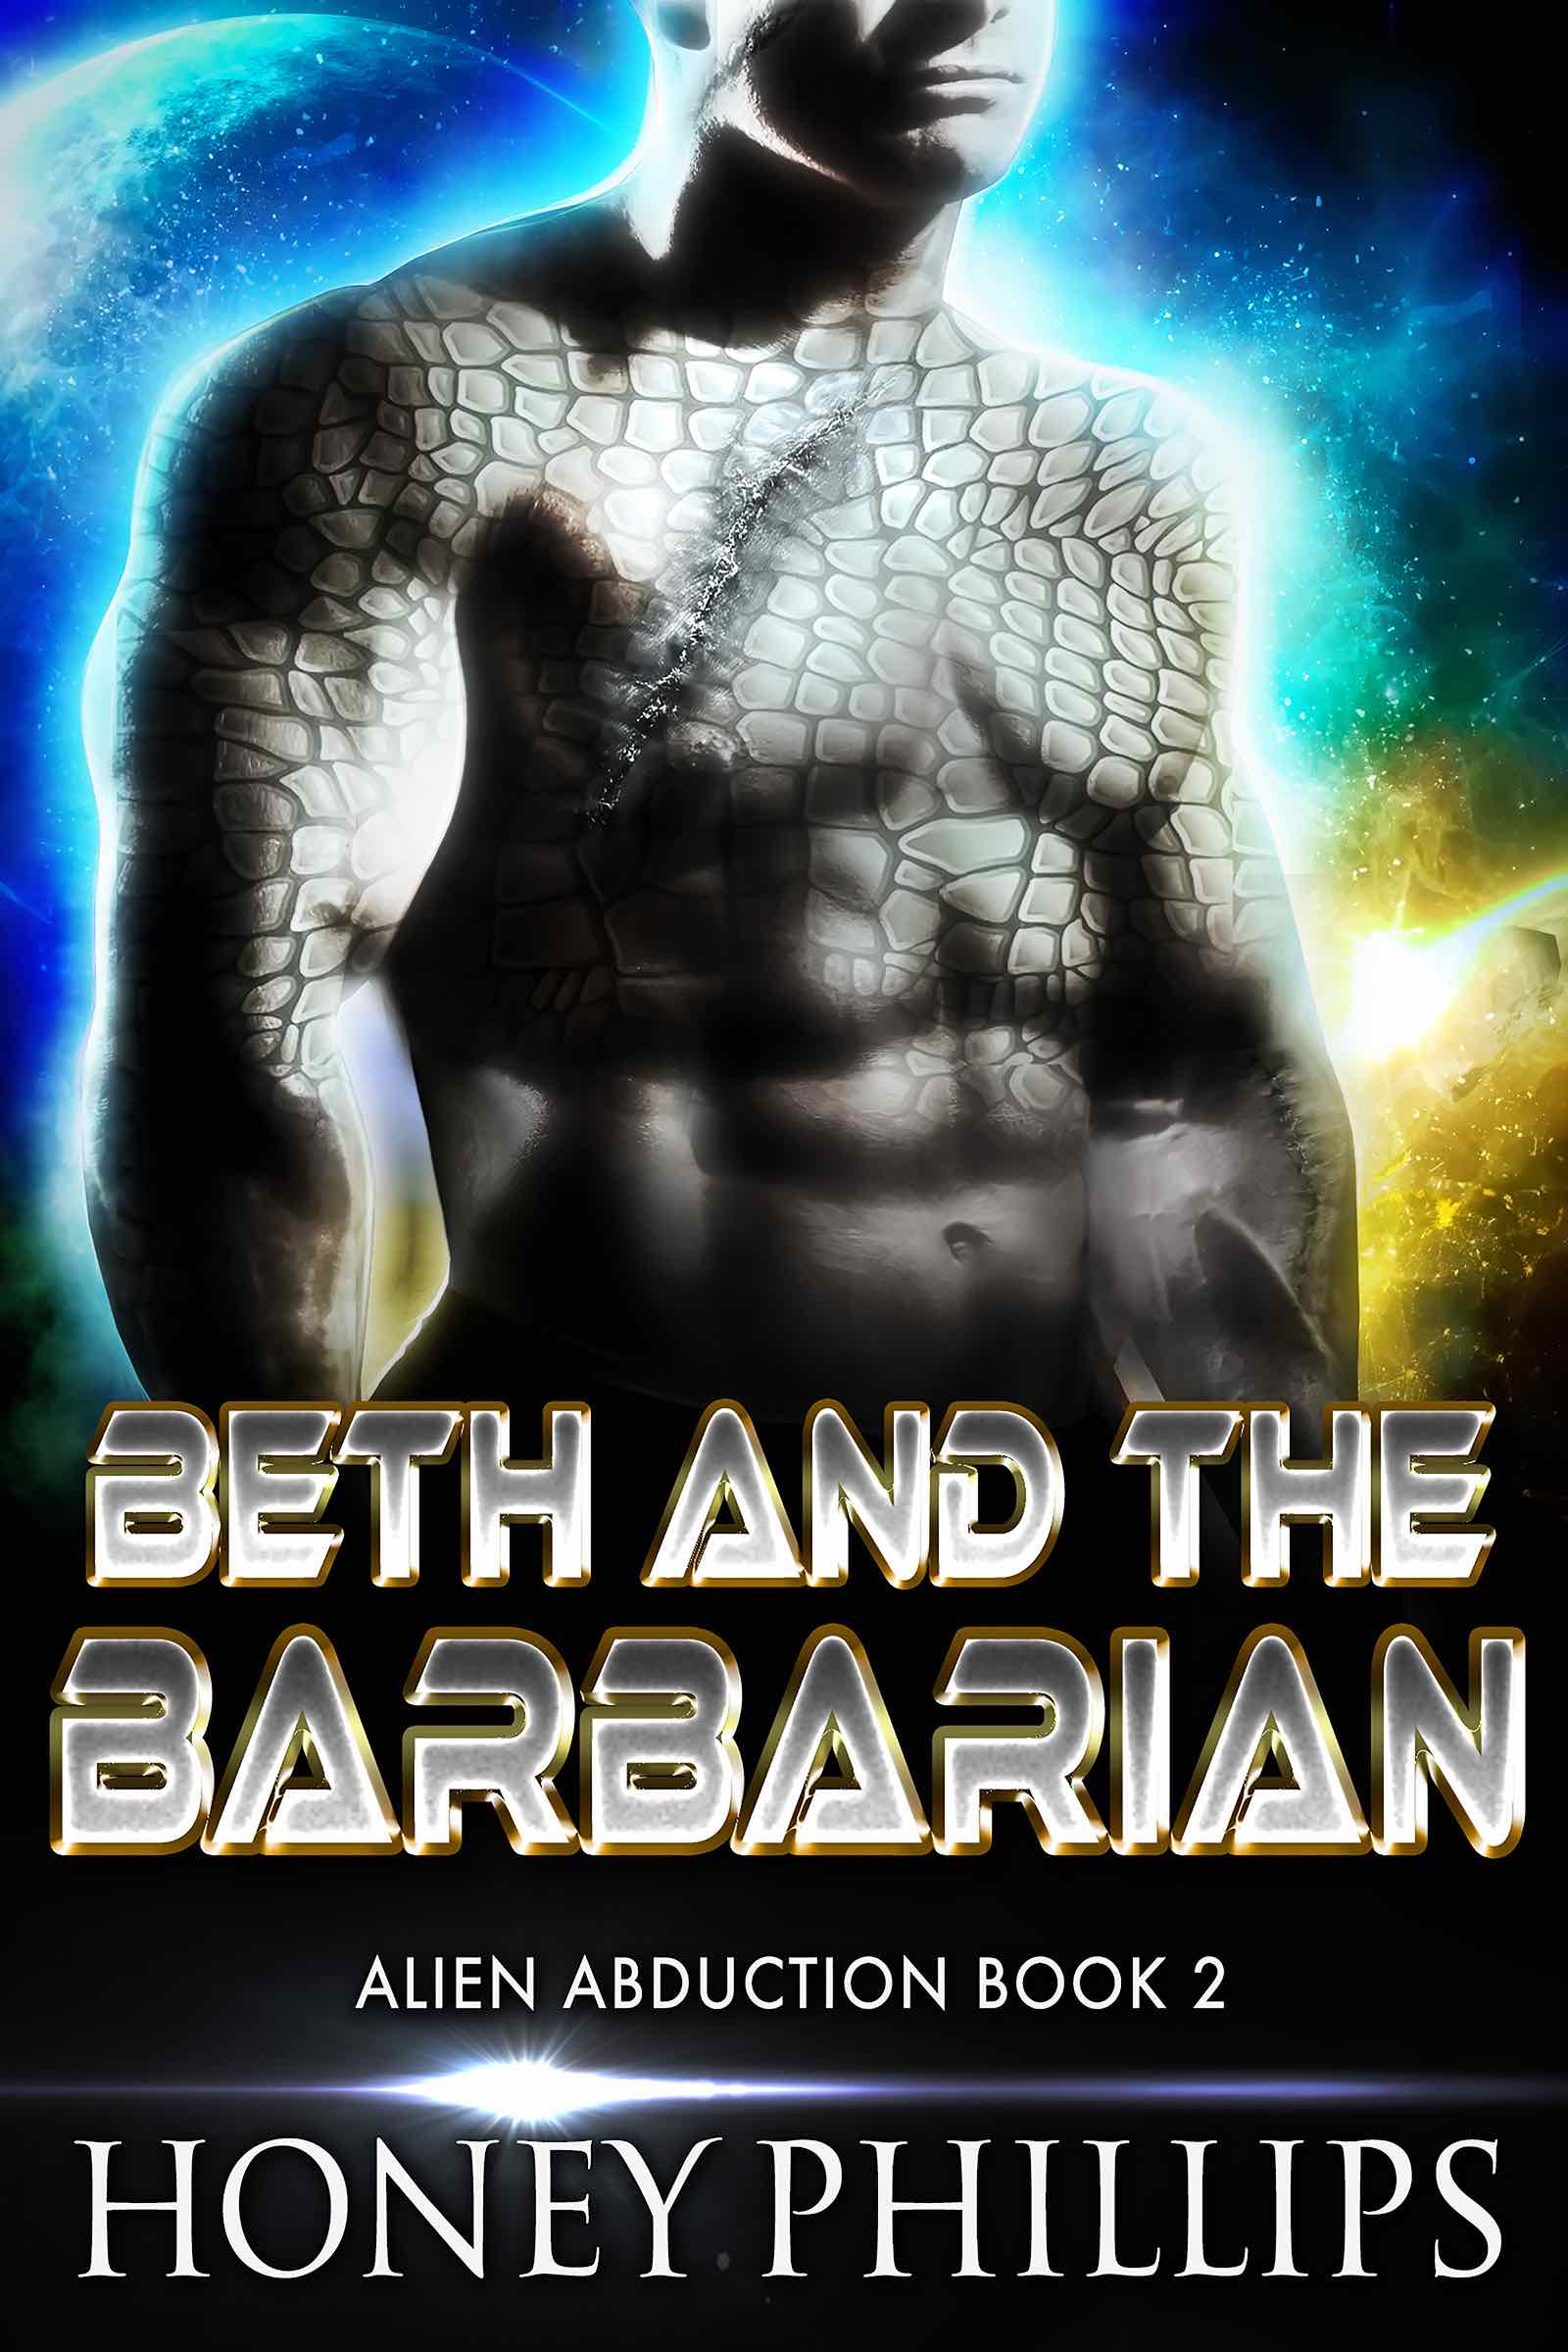 Beth-and-the-Barbarian.jpg